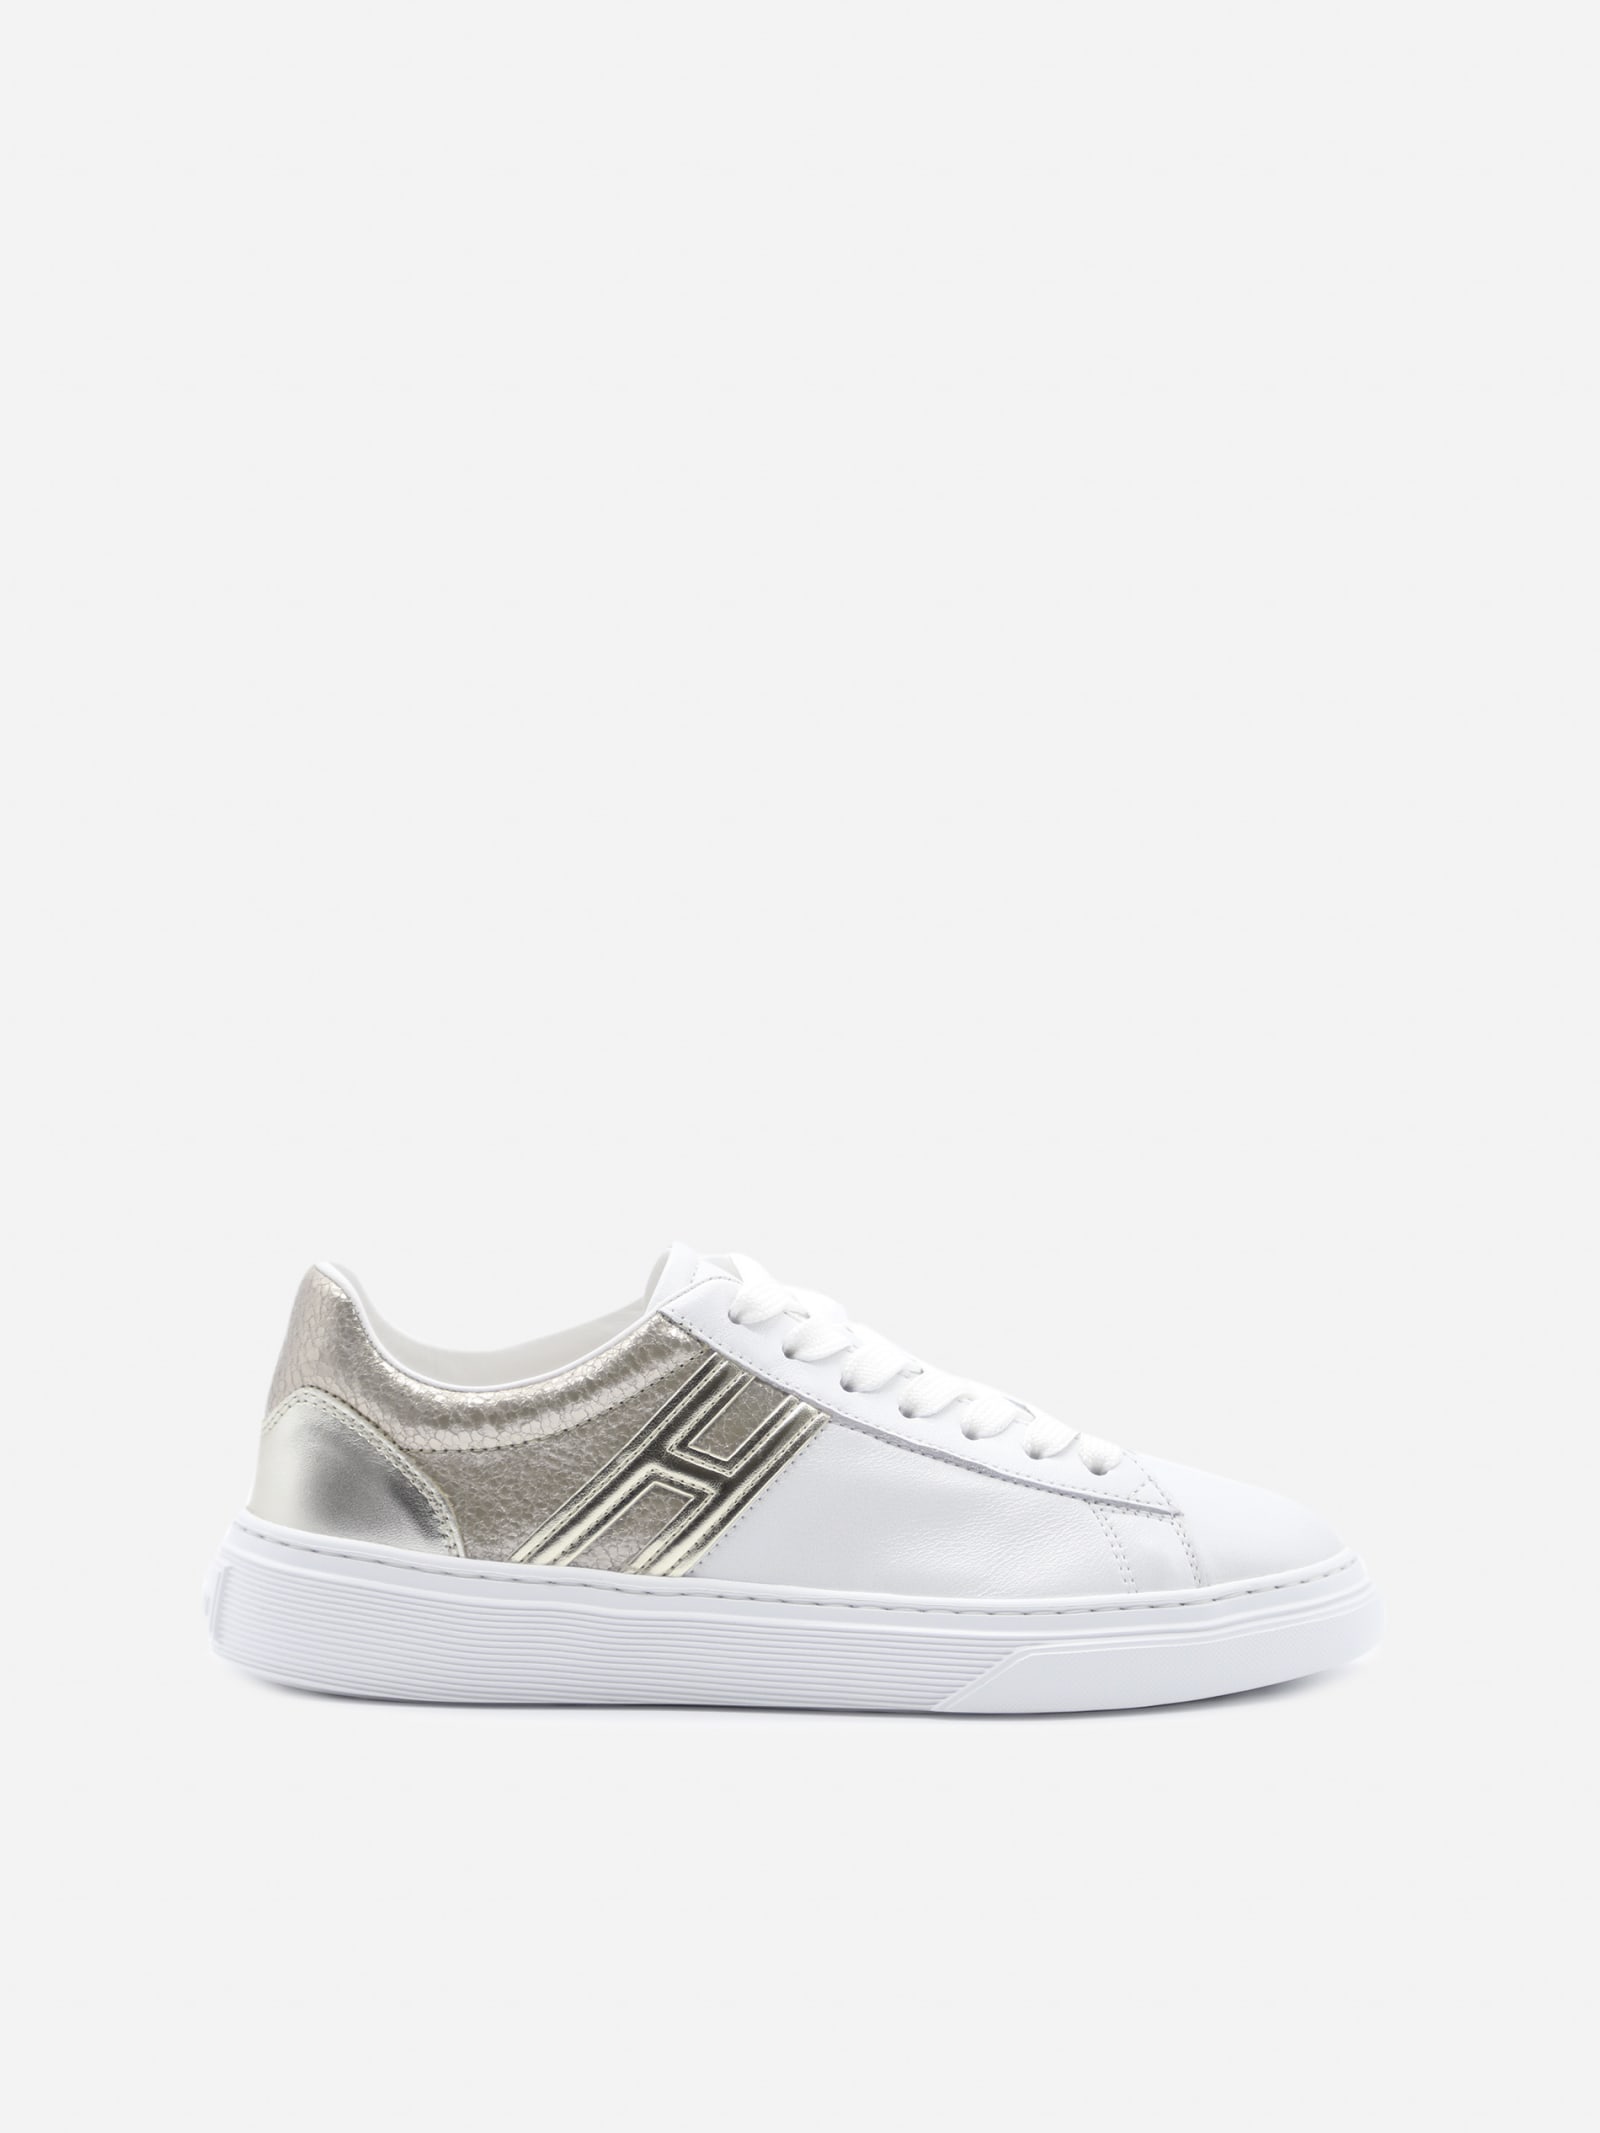 Hogan H365 Sneakers In Leather With Metallic Effect Inserts